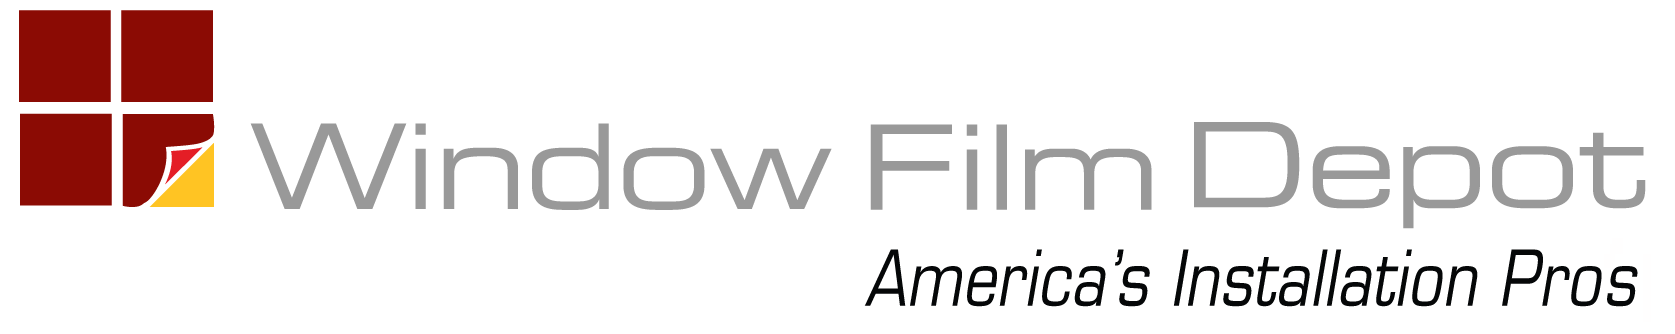 Window Film Depot Named “3M National Dealer of the Year” -- Window Film ...